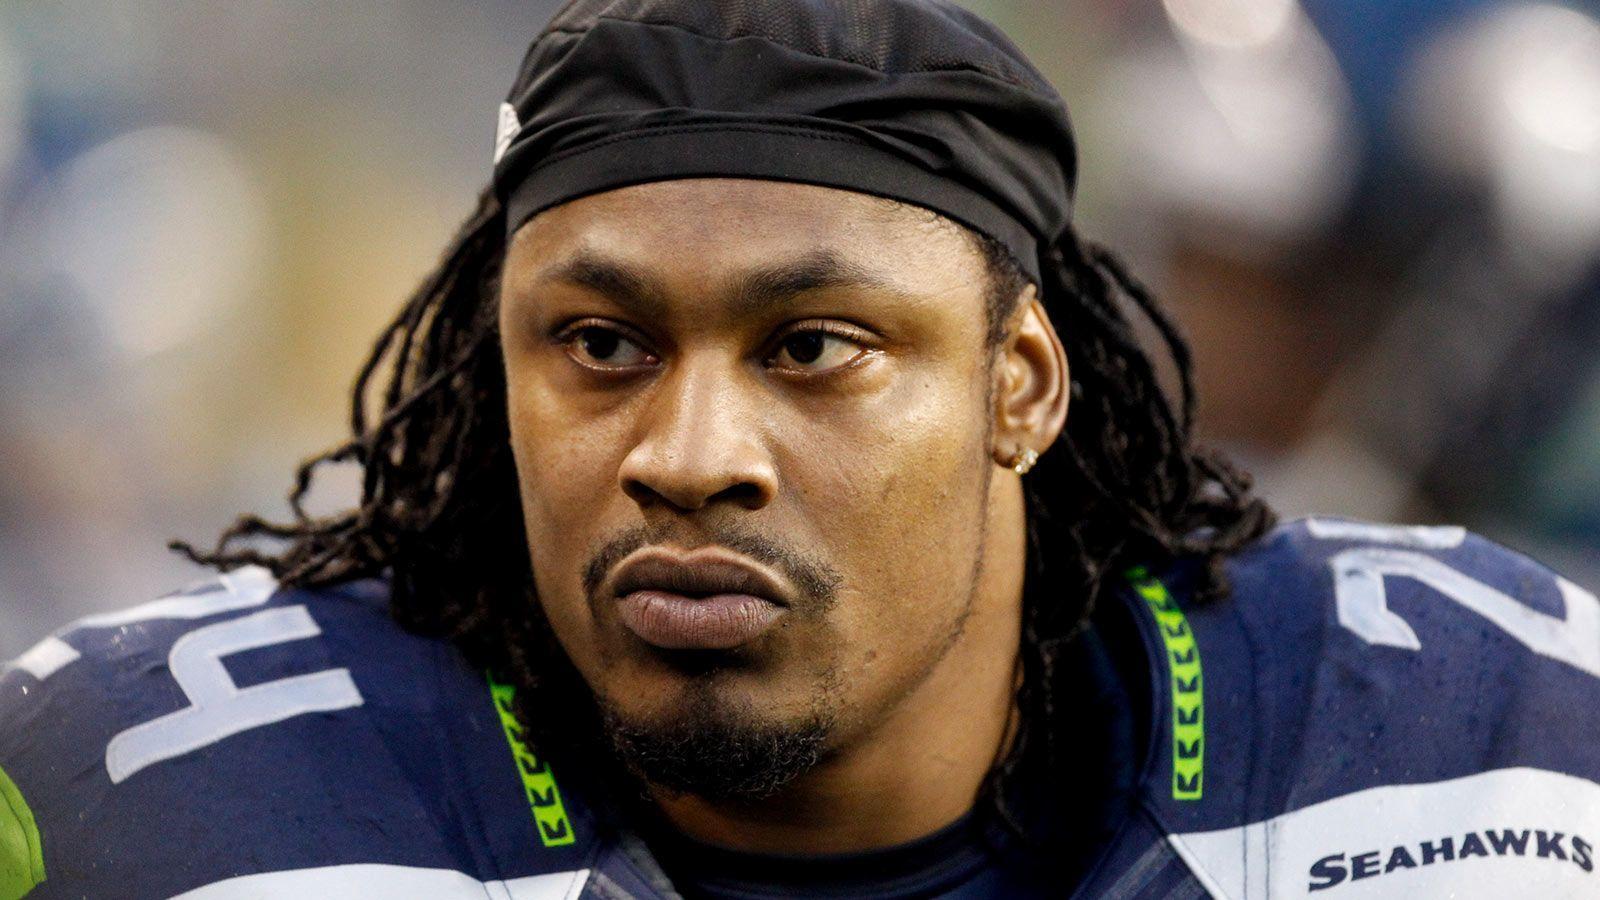 Marshawn Lynch doesn't want to talk about my mother's death. He